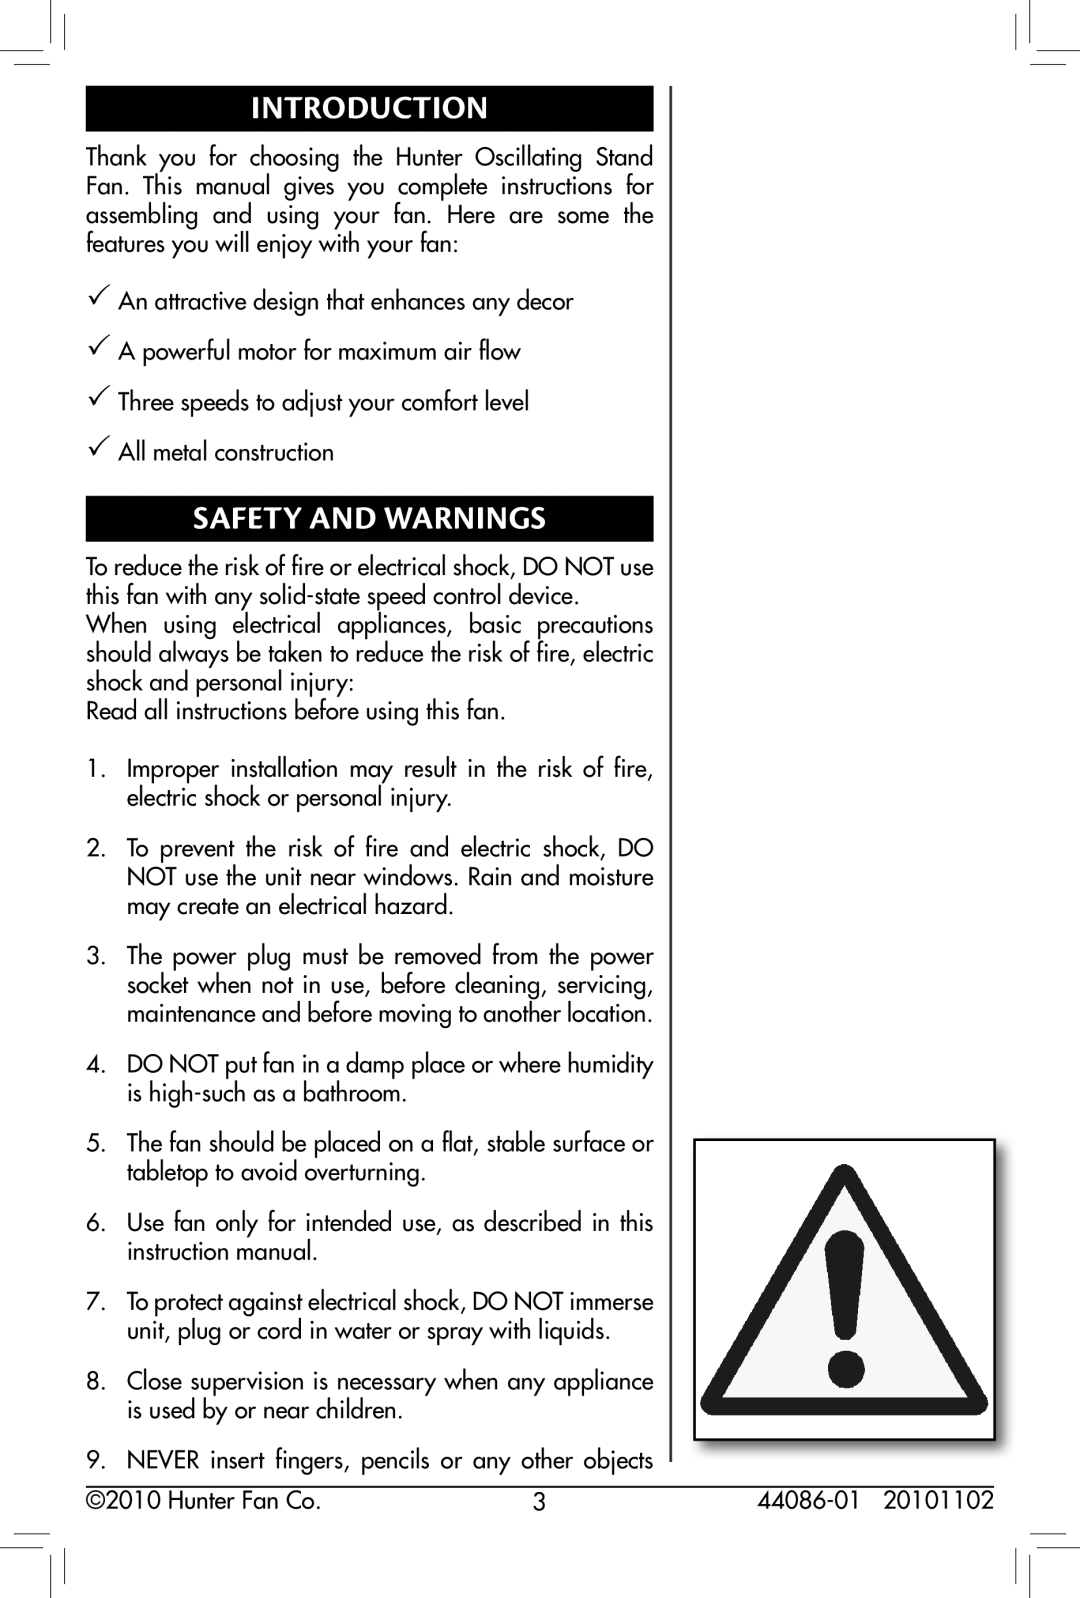 Hunter Fan 90434, 90435 owner manual Introduction, Safety and Warnings 